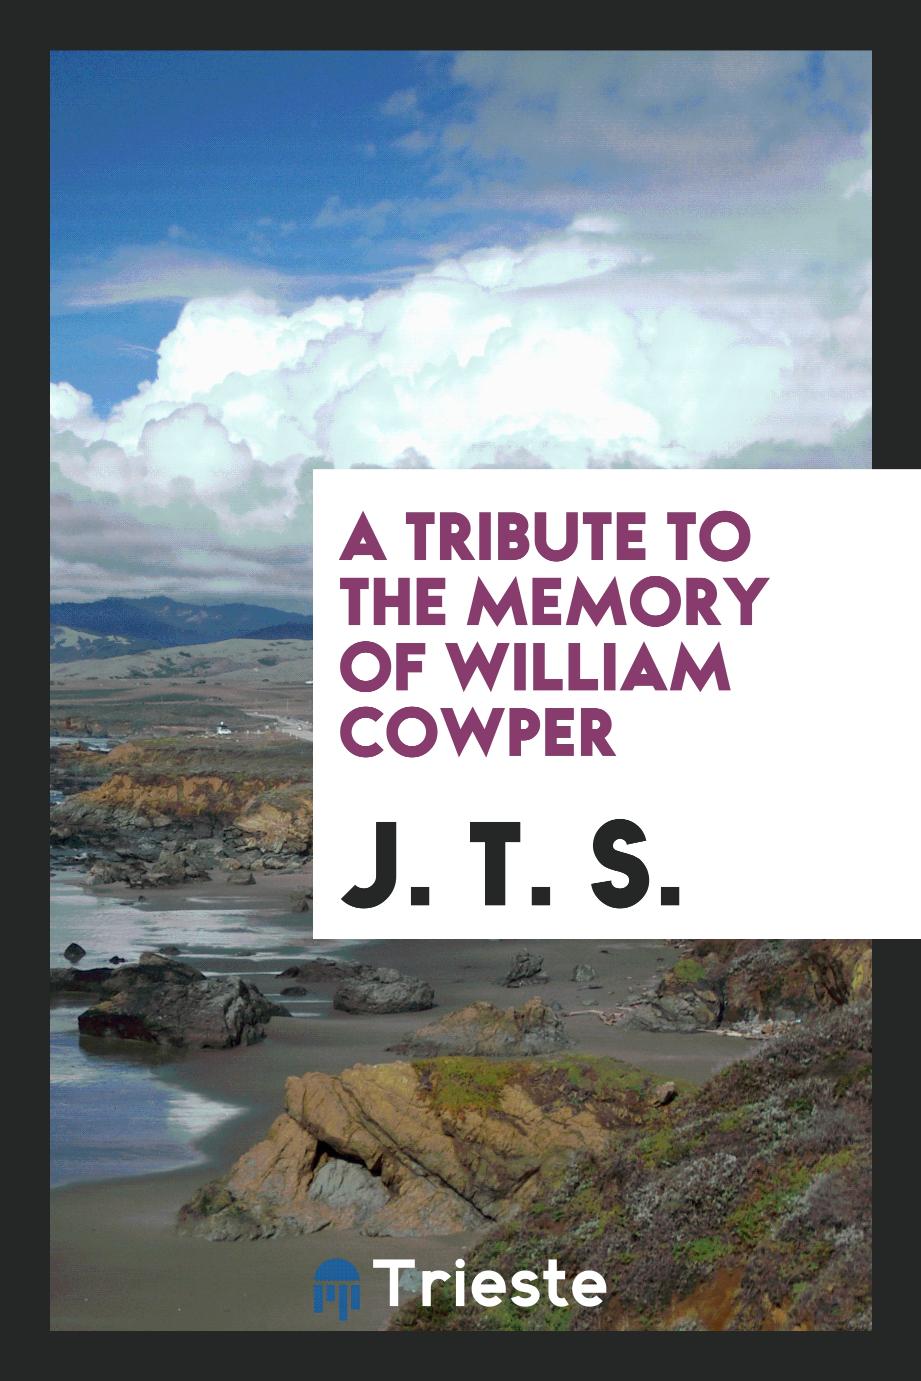 A Tribute to the Memory of William Cowper